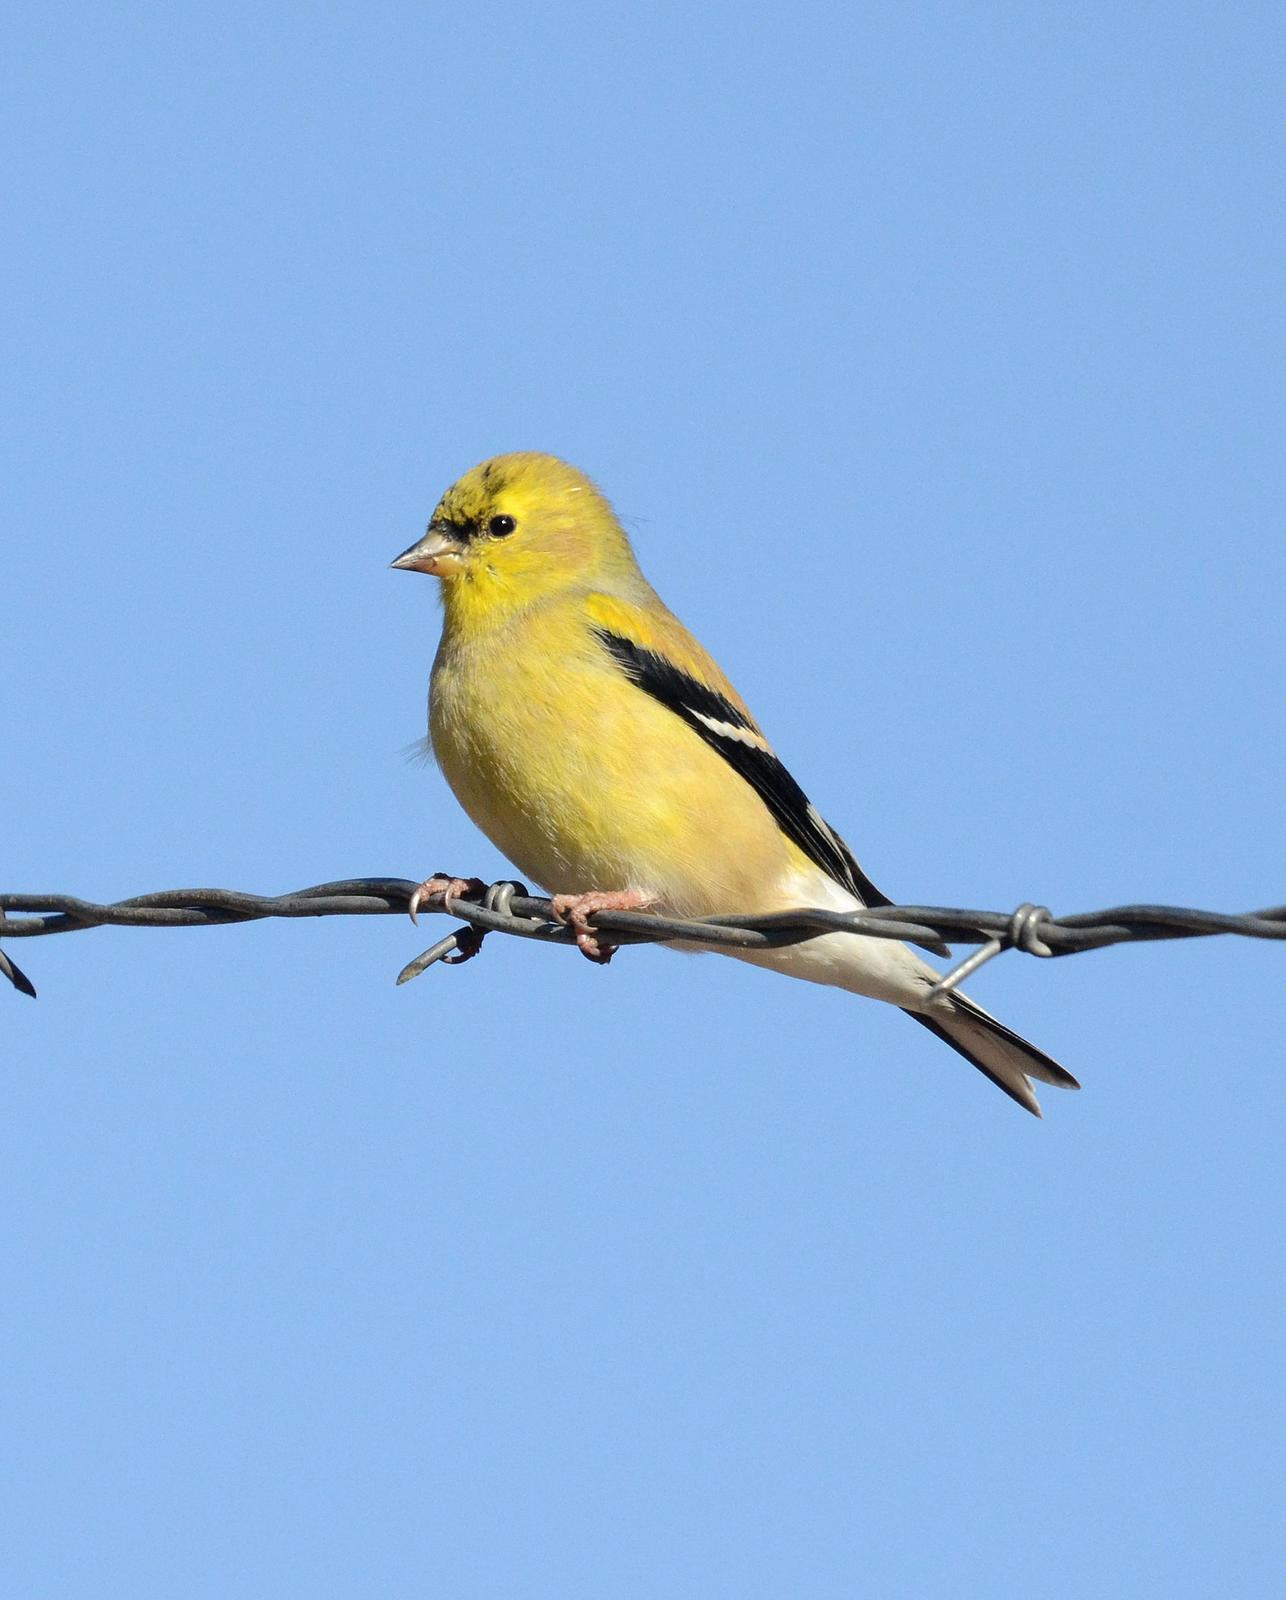 American Goldfinch Photo by Steven Mlodinow